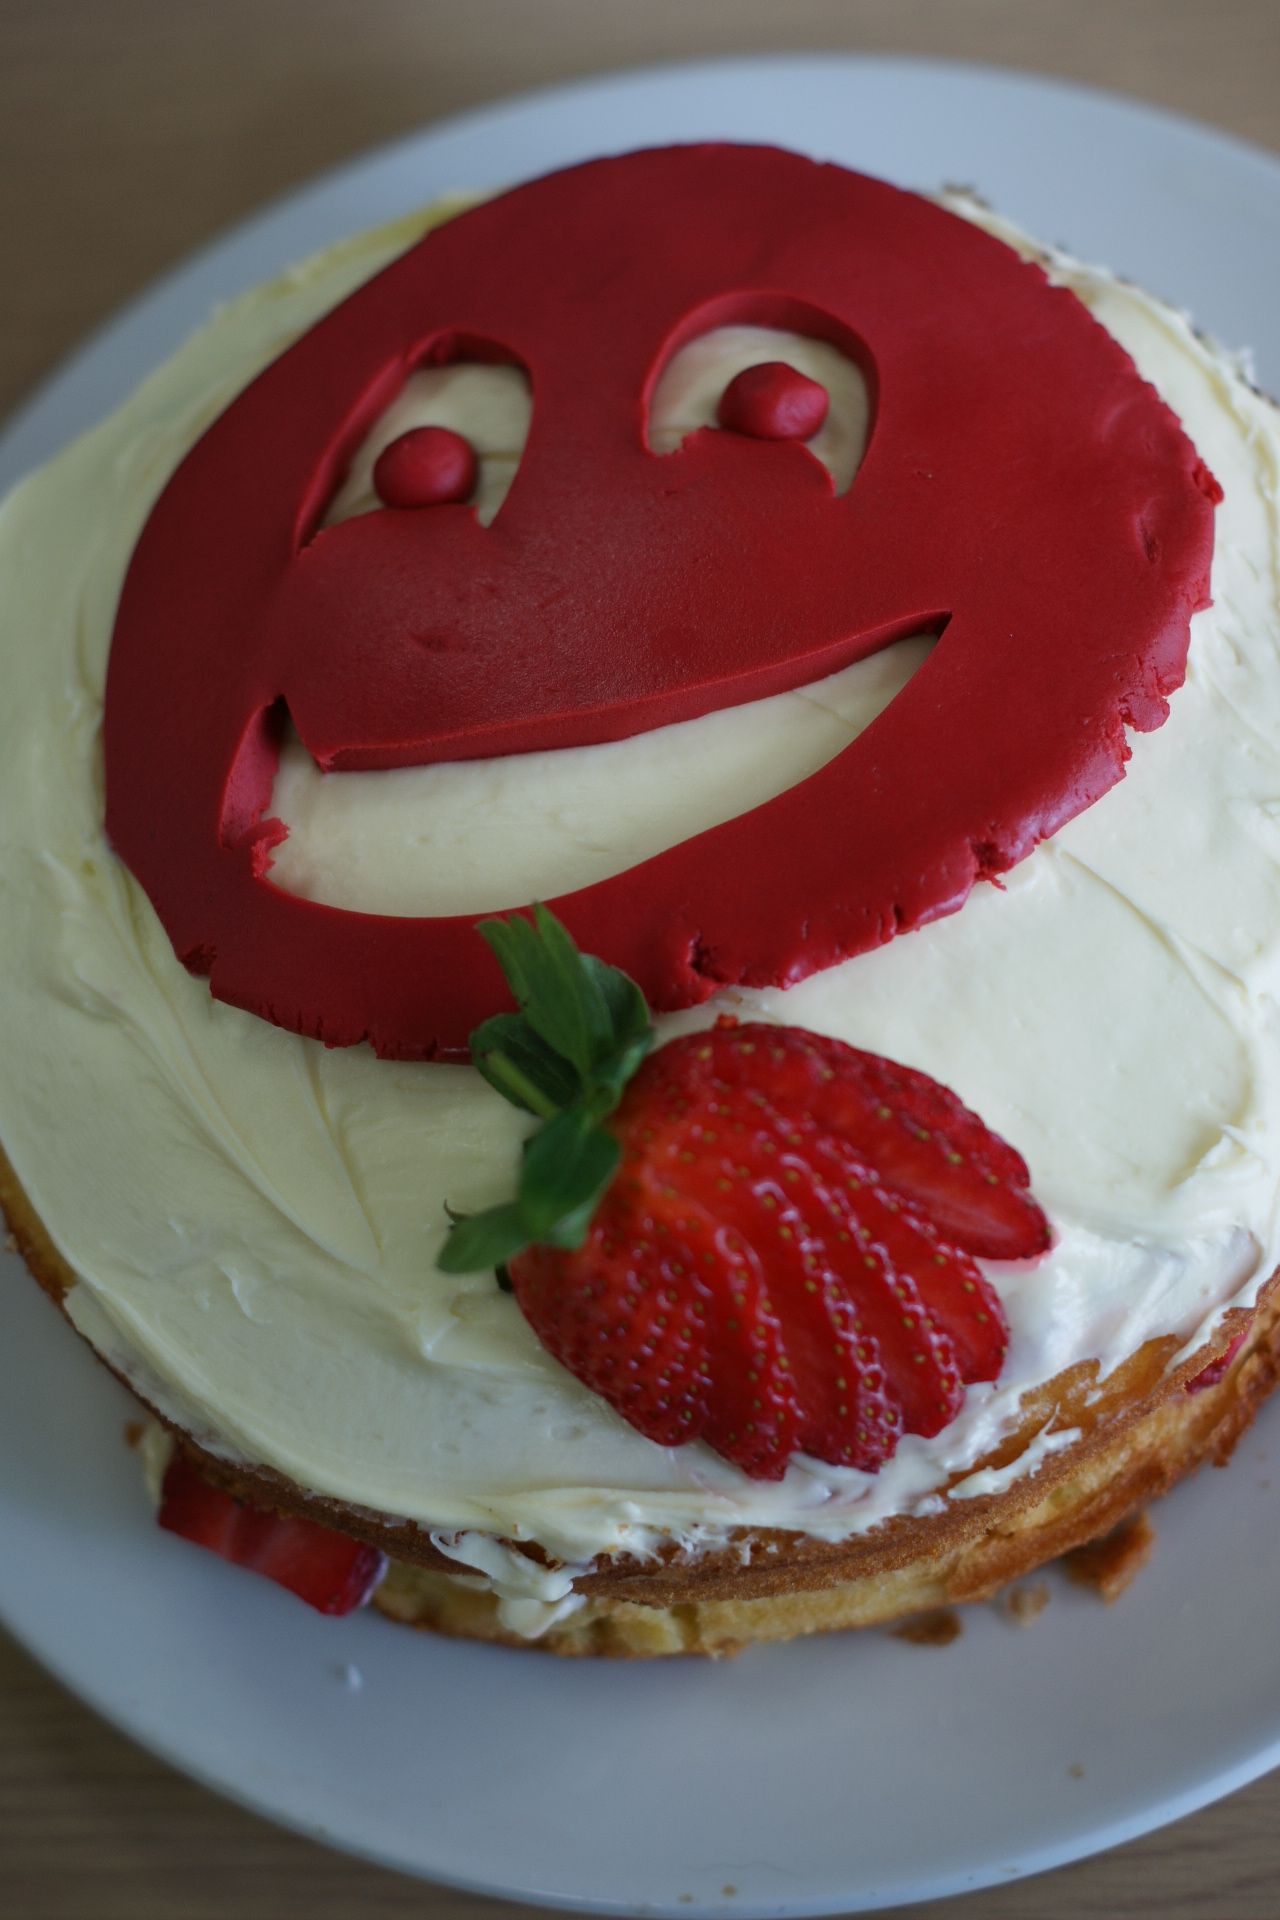 comic relief bake off march 2017